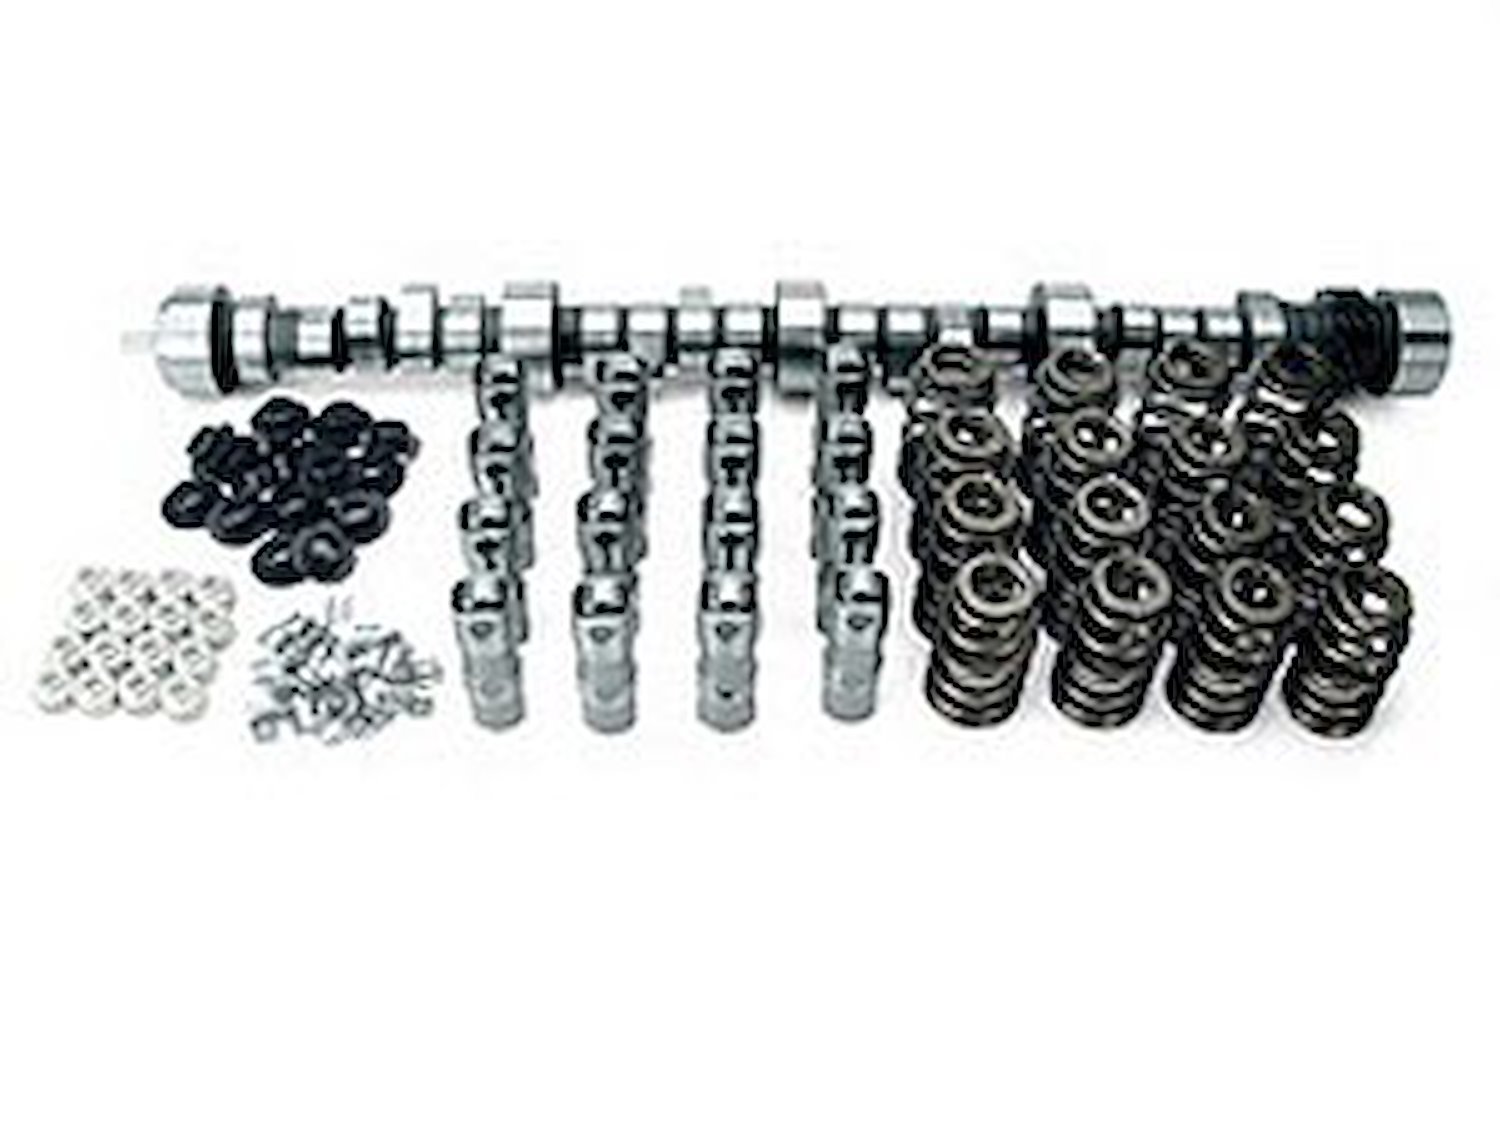 Computer Controlled Hydraulic Roller Tappet Camshaft Complete Kit RPM Range: 1400-5400